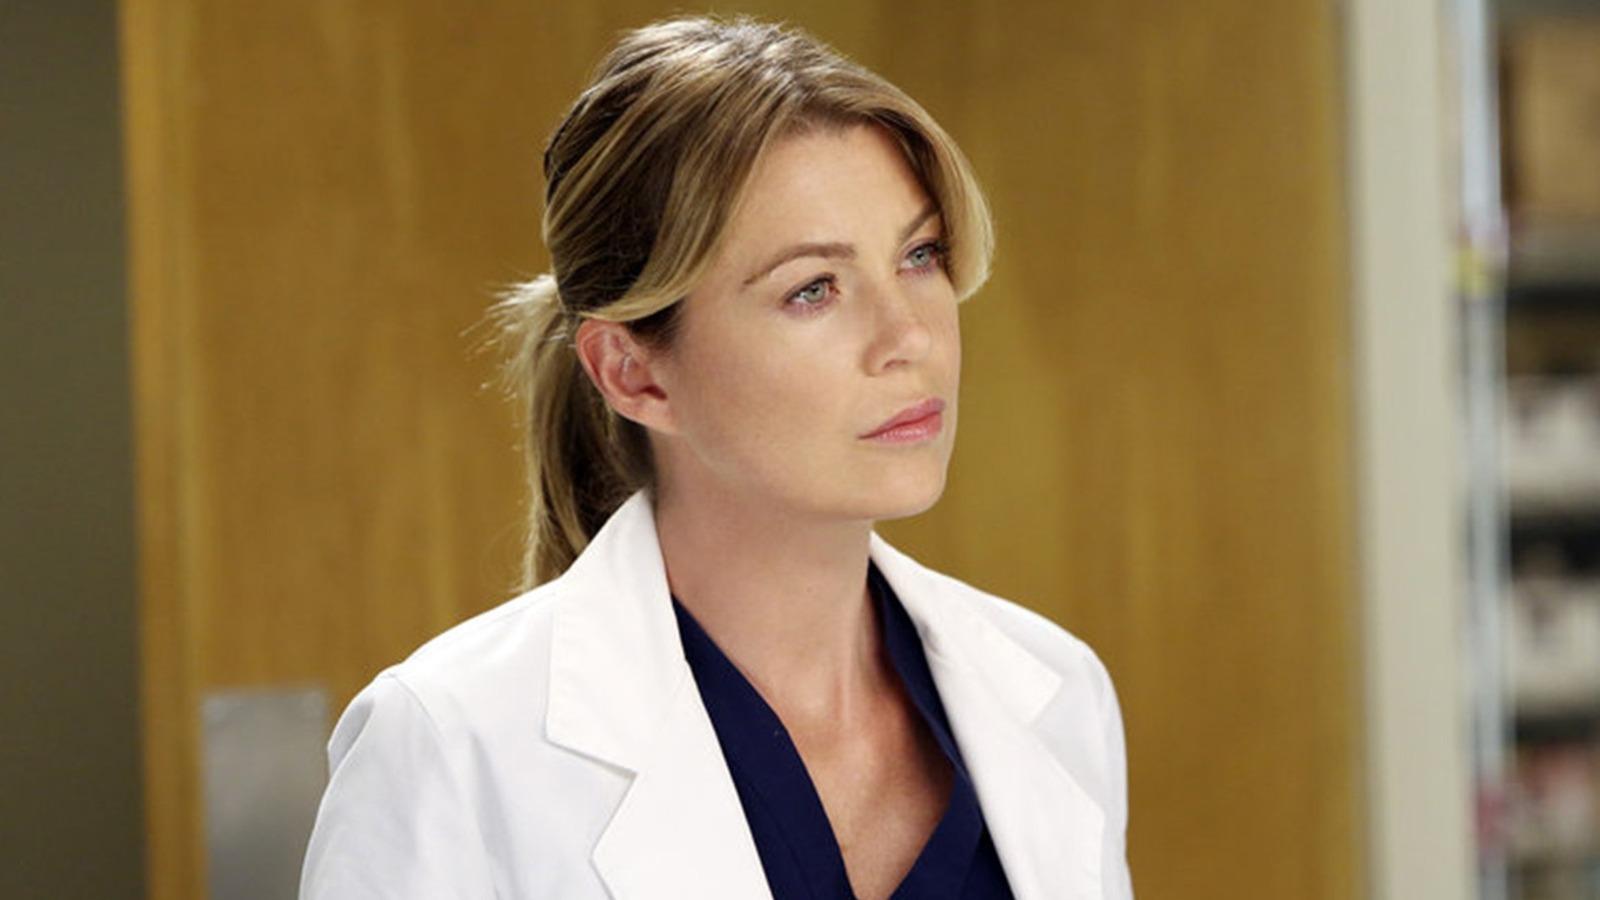 Where Is Grey's Anatomy Actually Filmed?